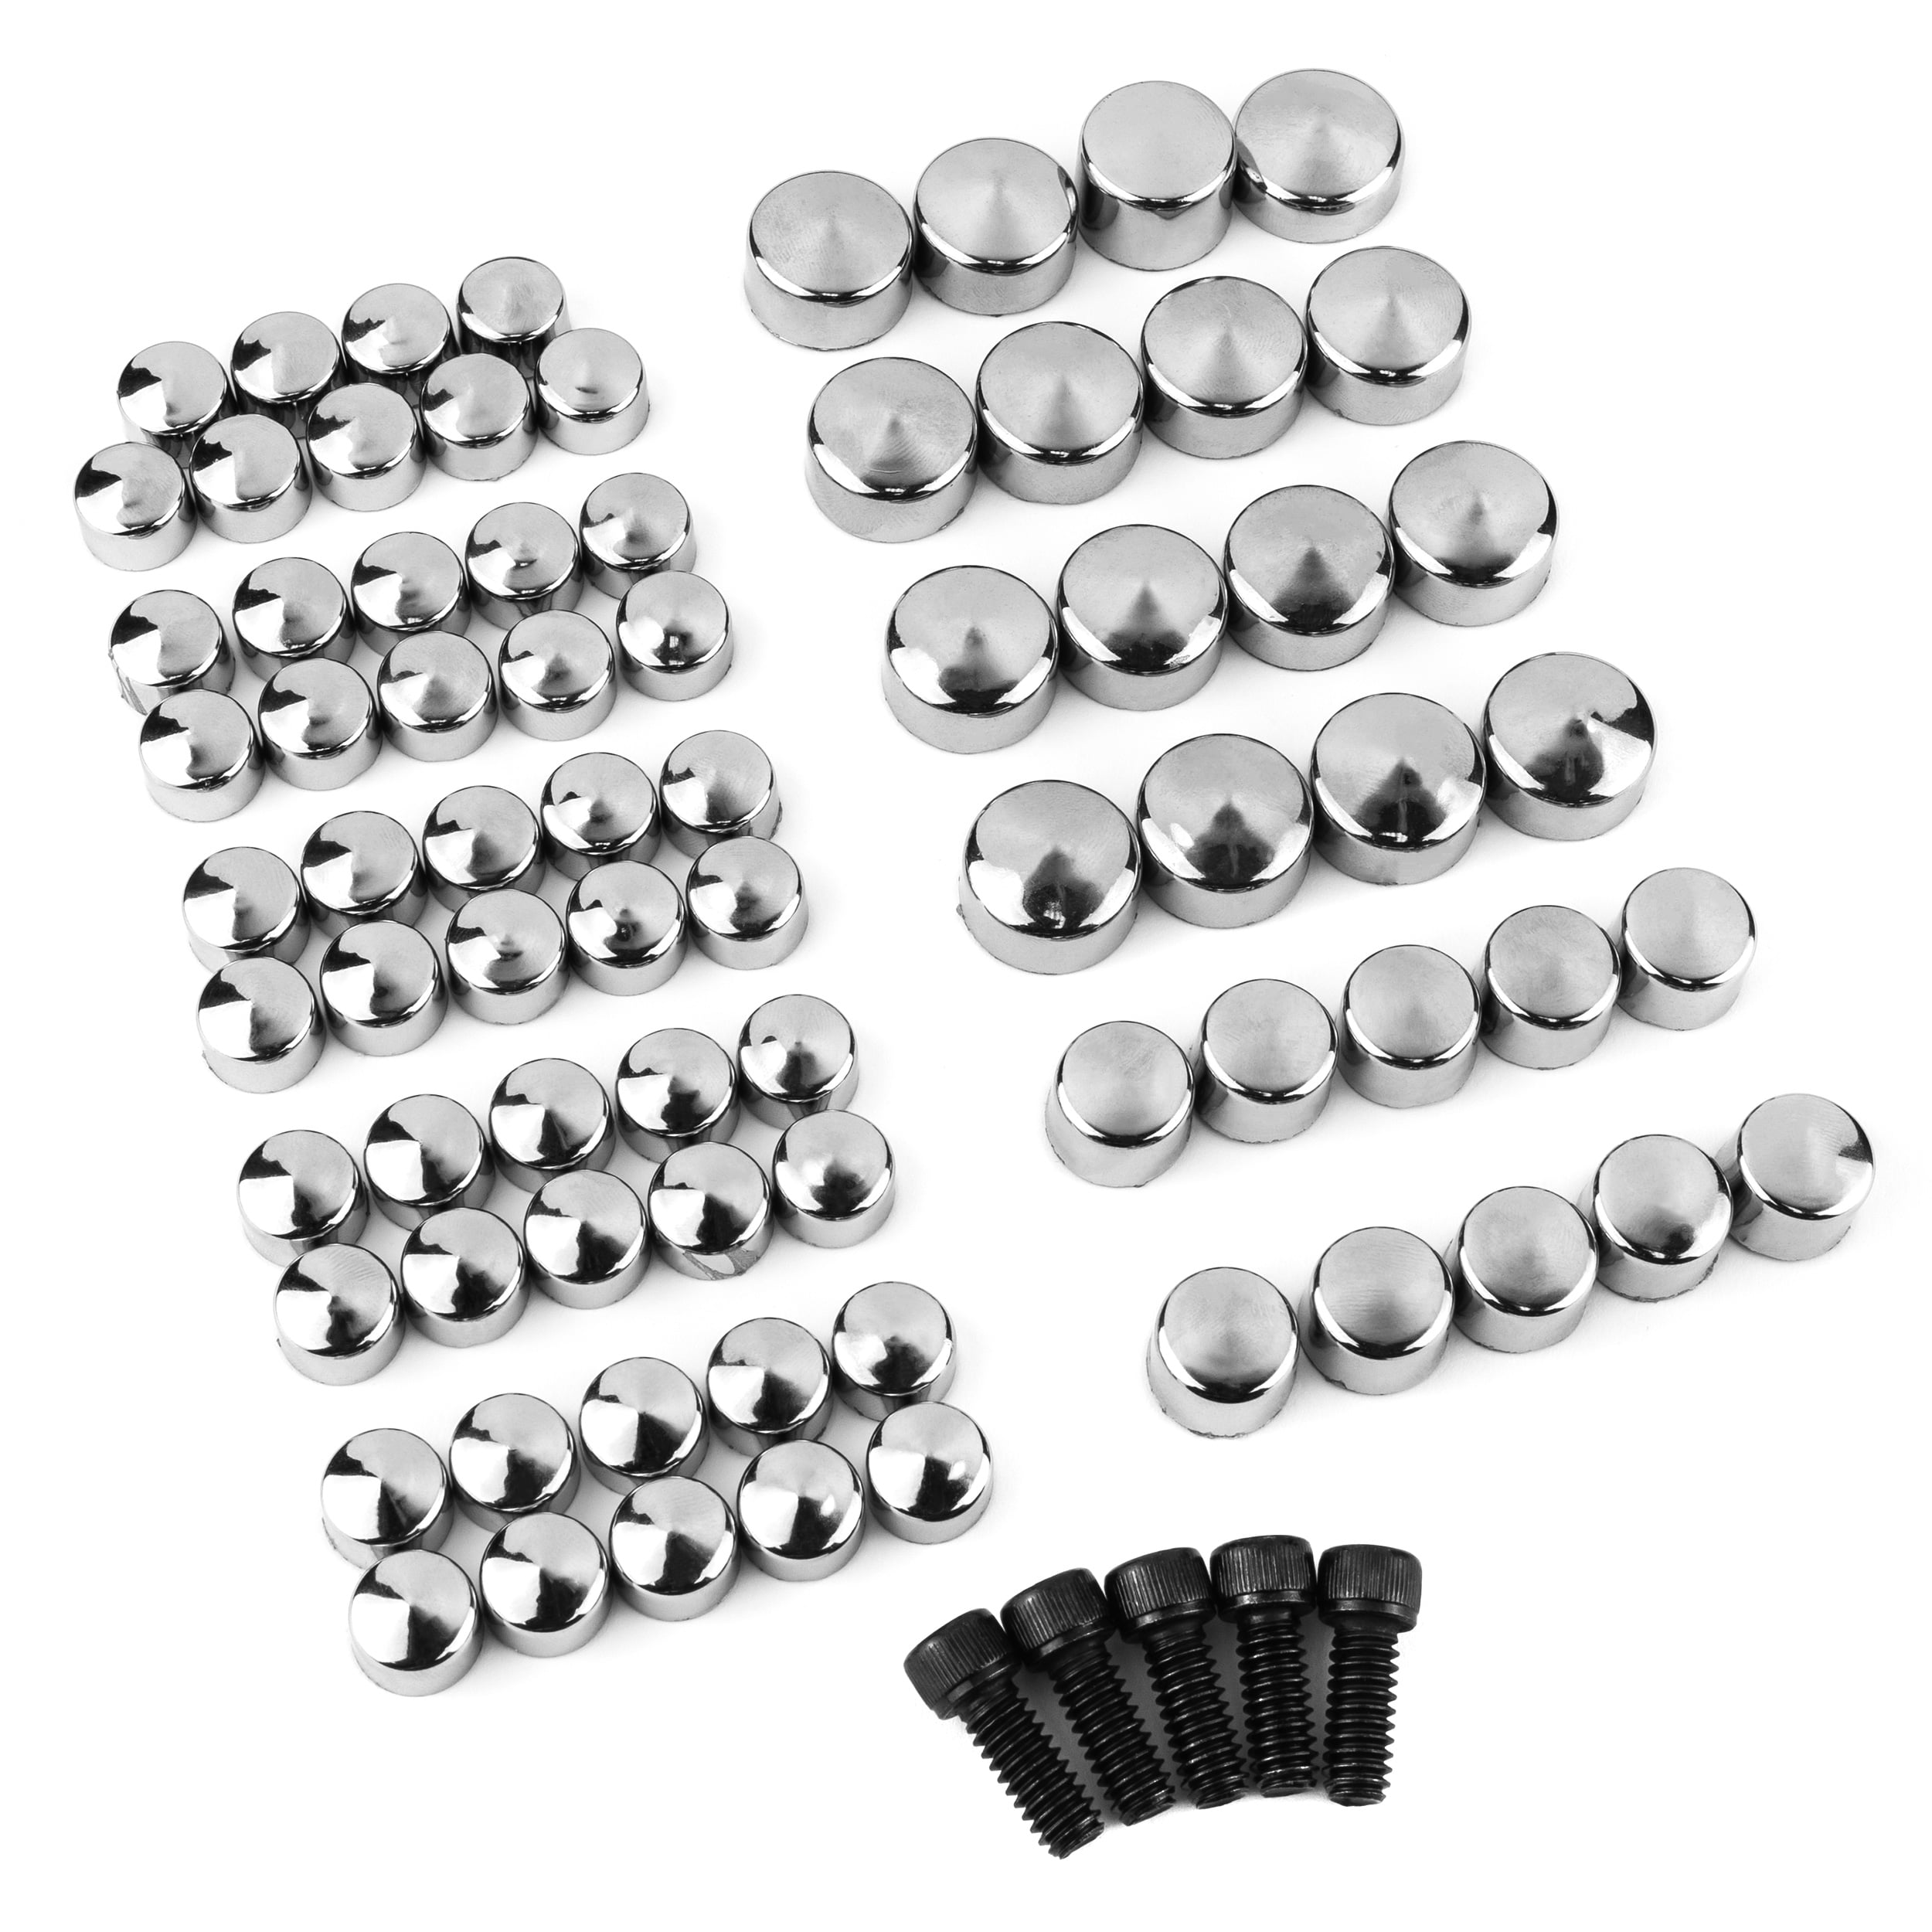 Black Chrome Plastic Bolts Toppers Cap Motorcycle For 2007-UP Harley FLT FLH black 